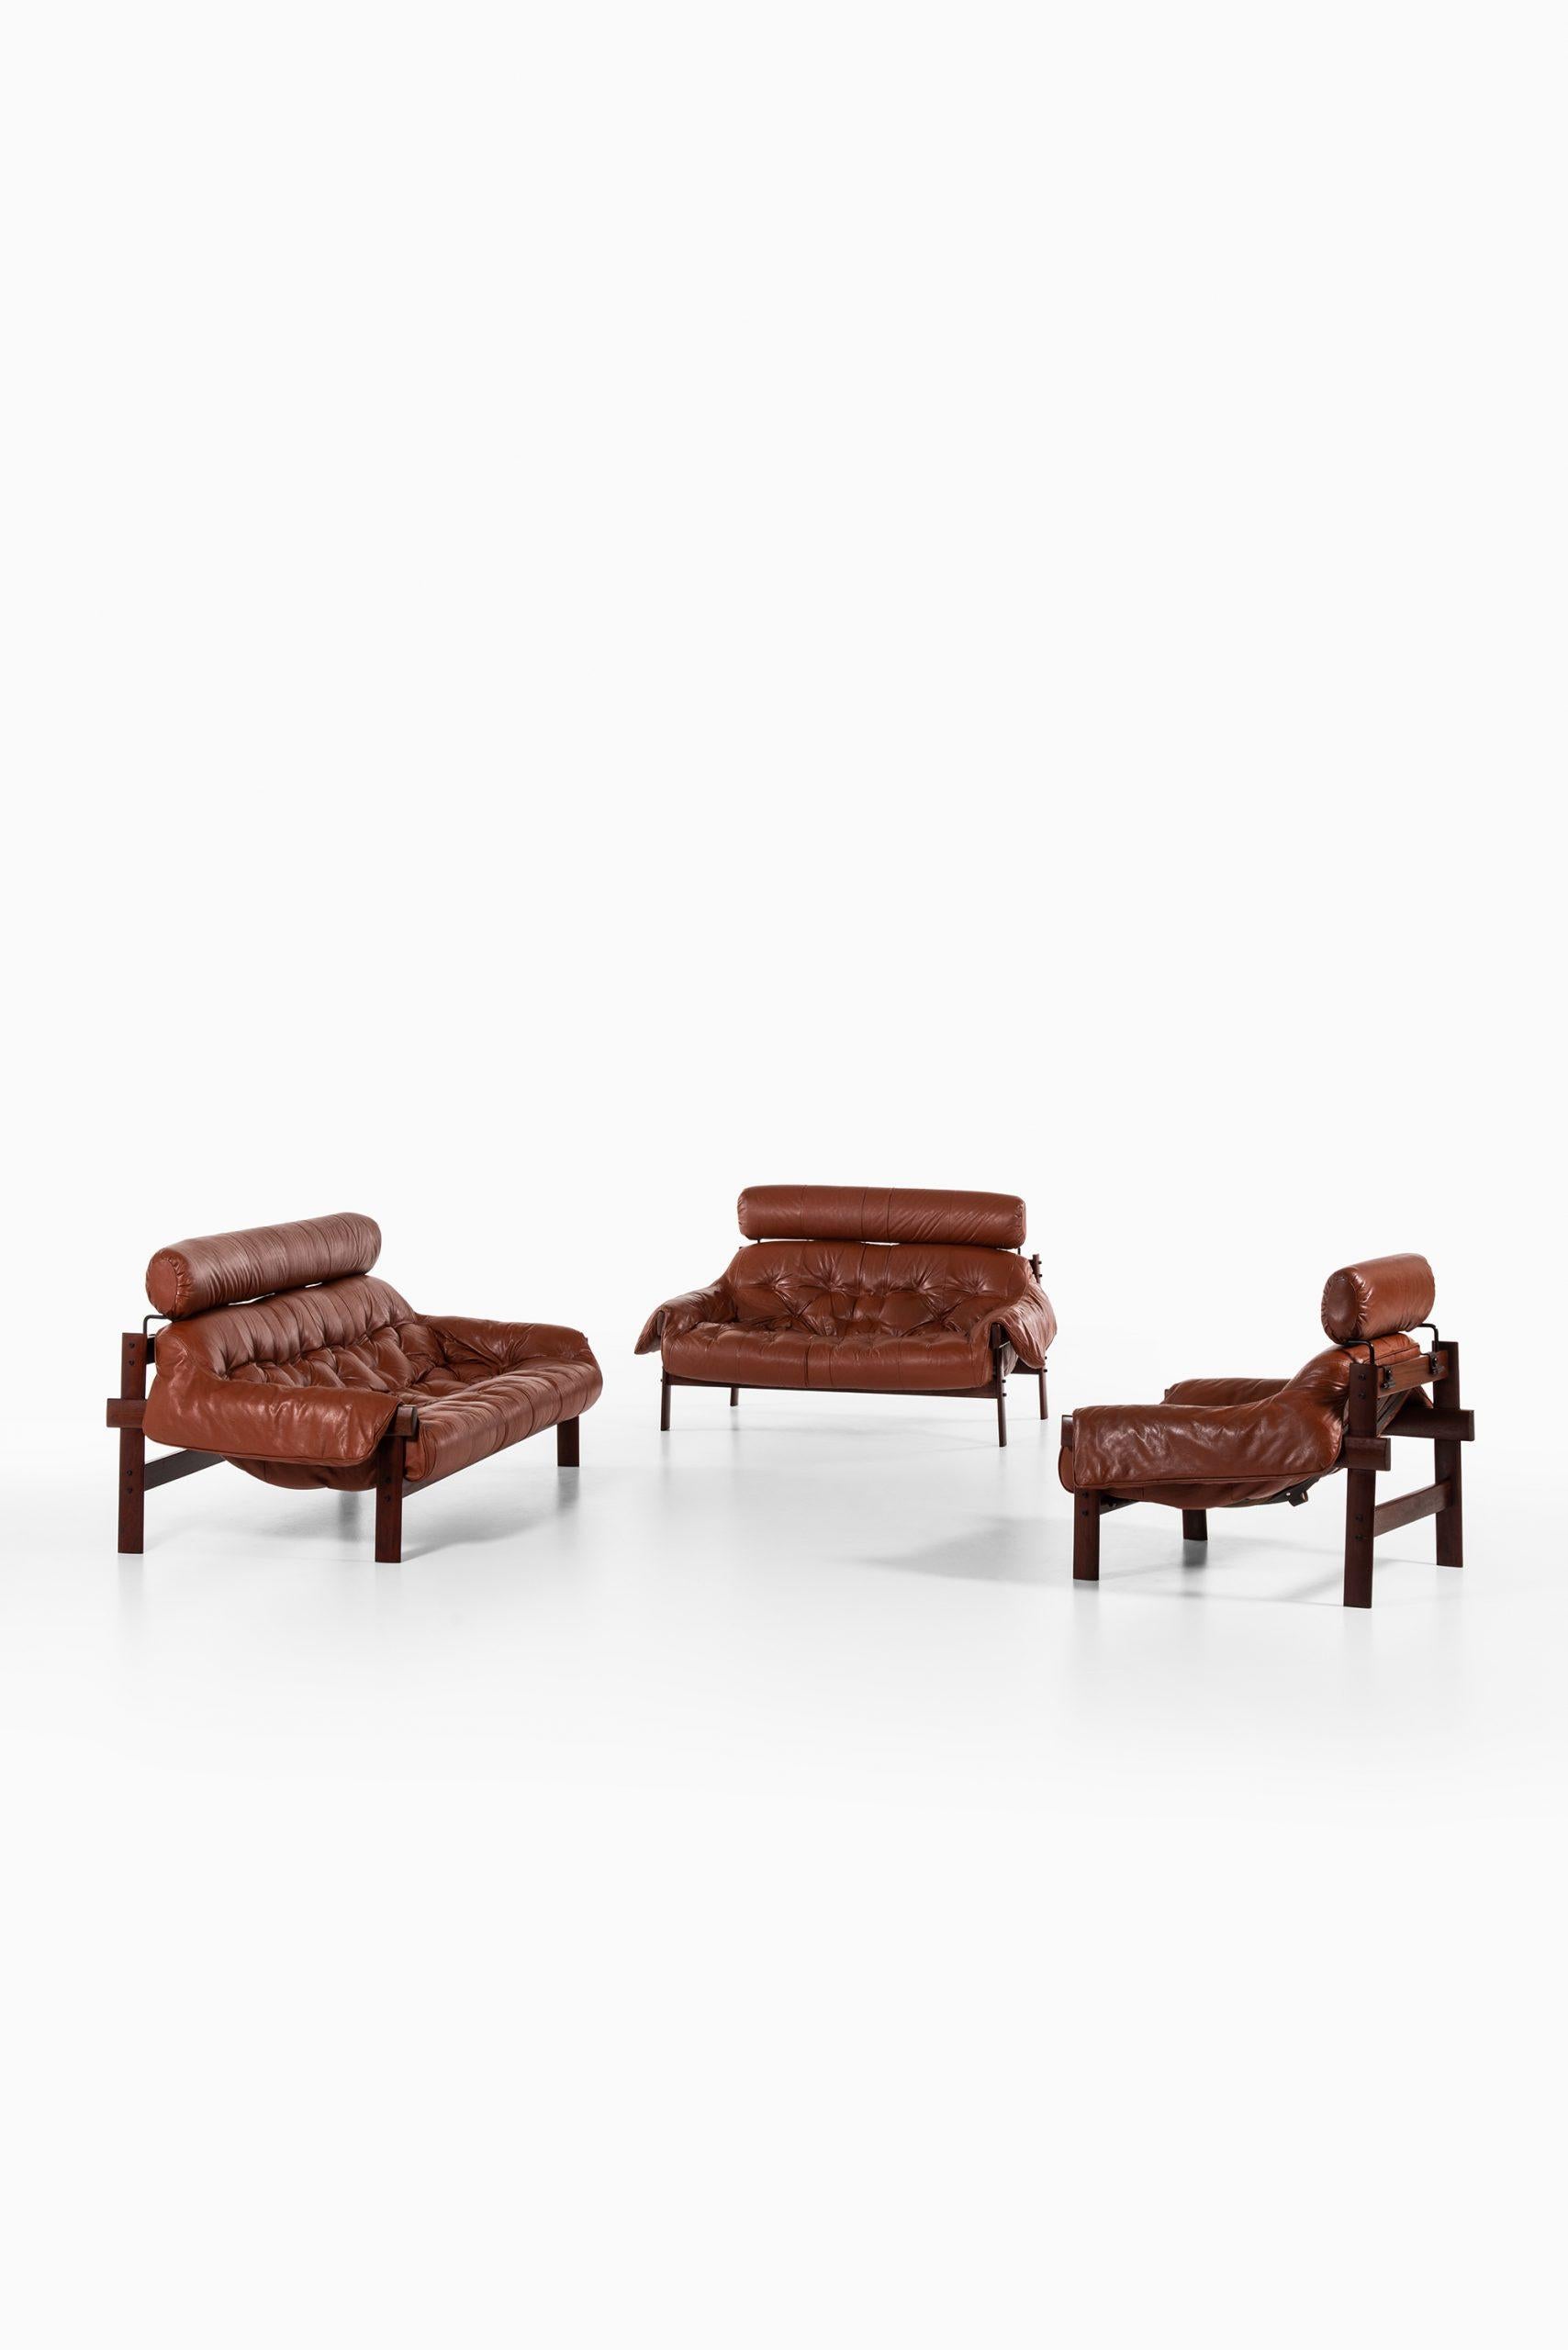 Mid-20th Century Percival Lafer Seating Group Produced by Lafer MP in Brazil